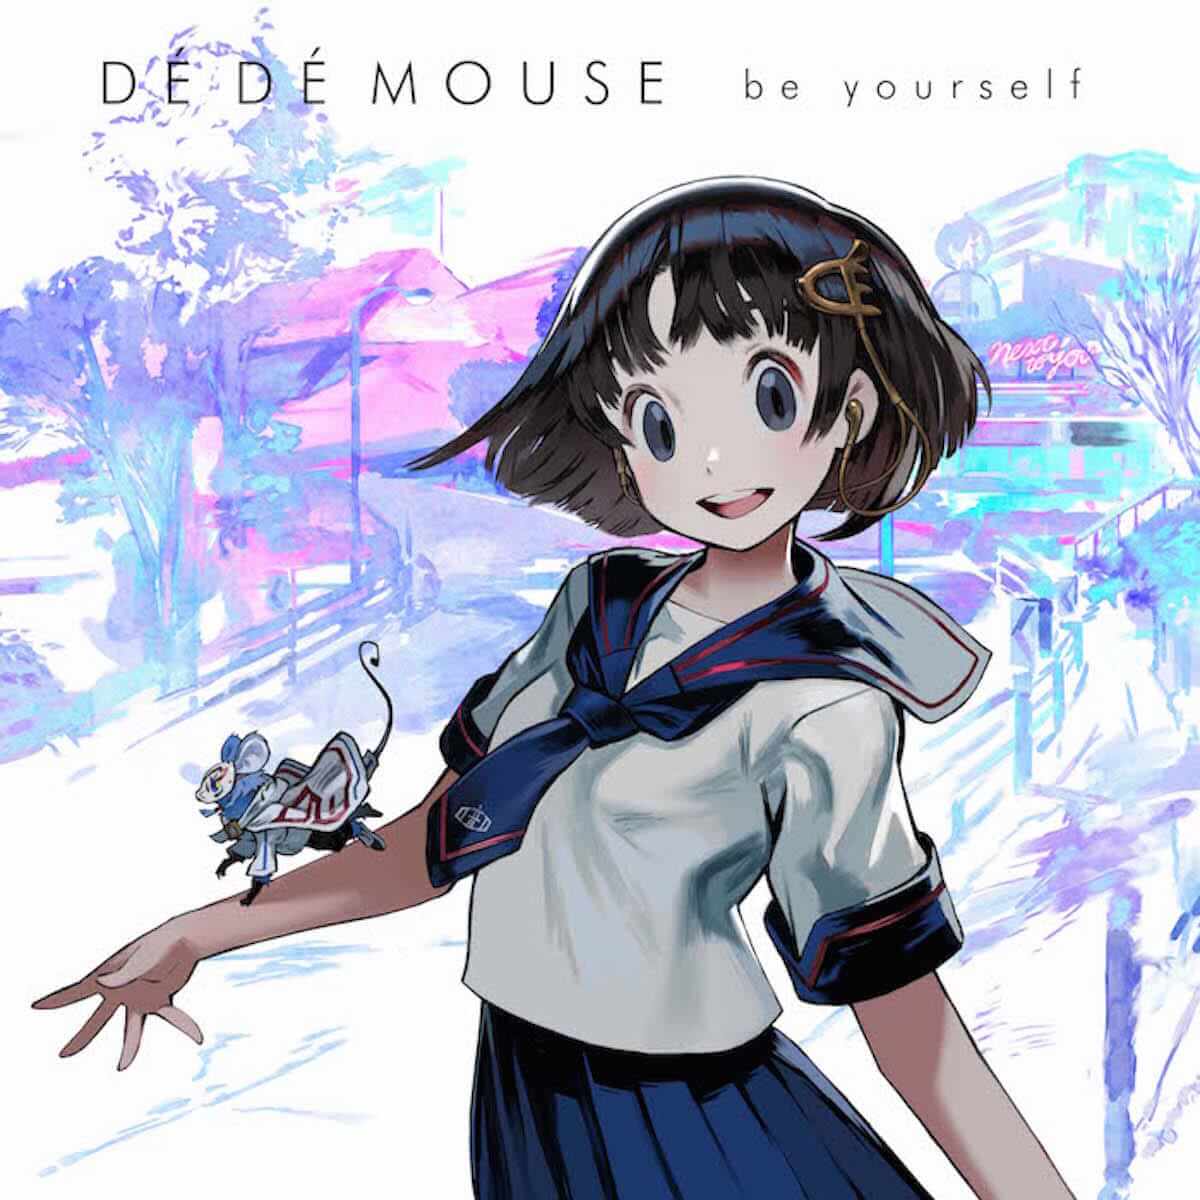 DÉ DÉ MOUSE最新作『be yourself』リリース！吉田凛音出演のタイトルトラックMVも公開！ music180614_dedemouse_2-1200x1200